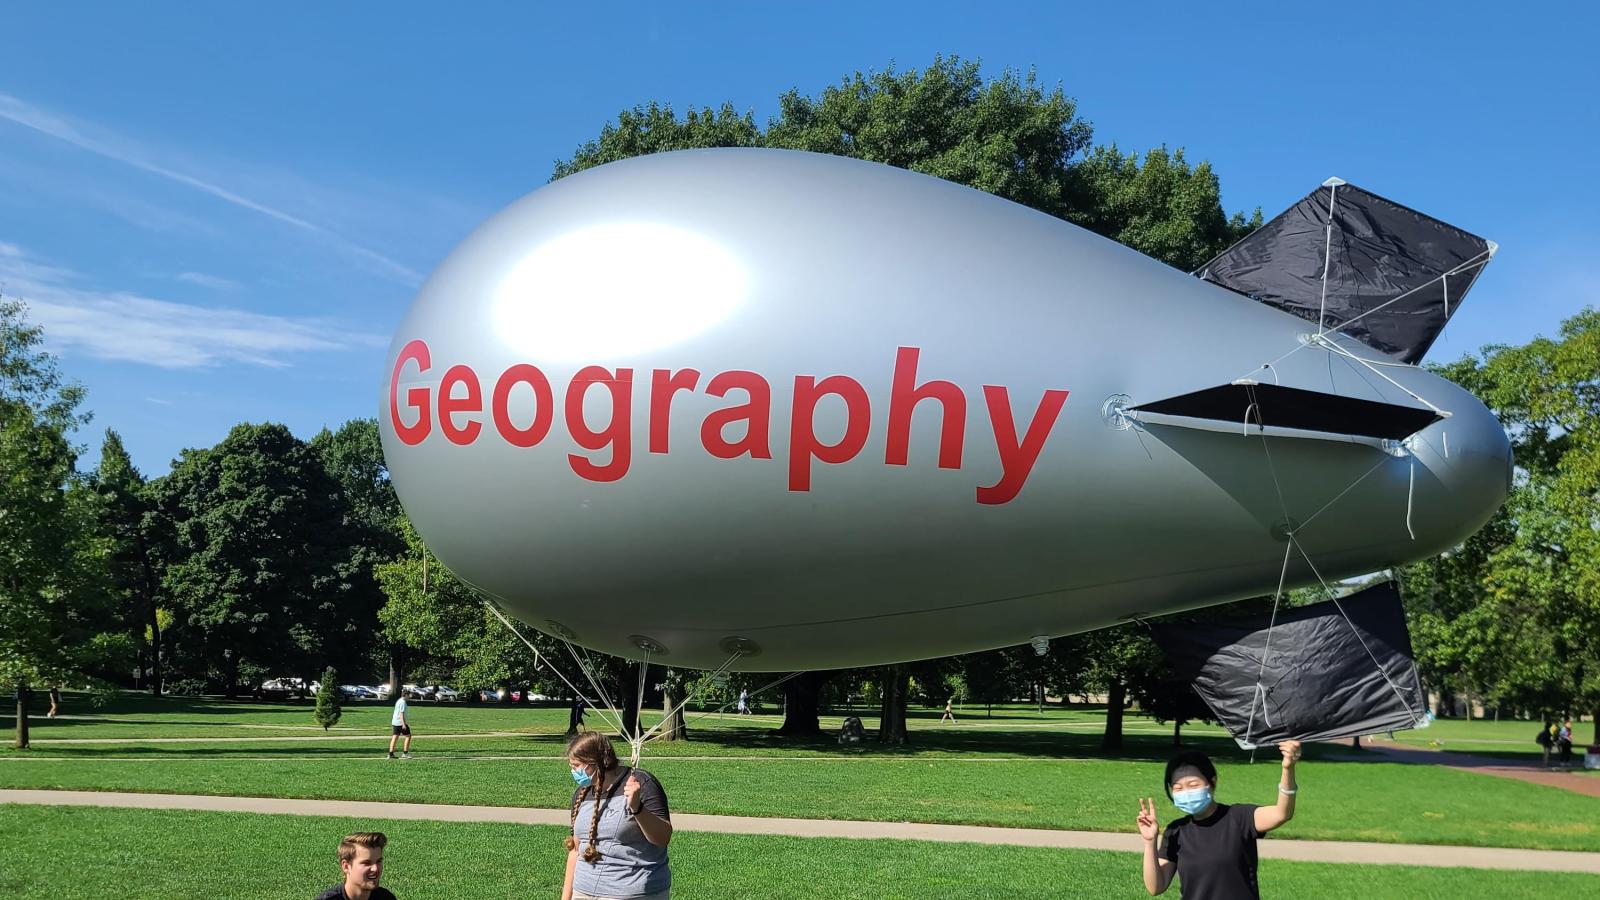 Geography 1900 blimp on the Oval